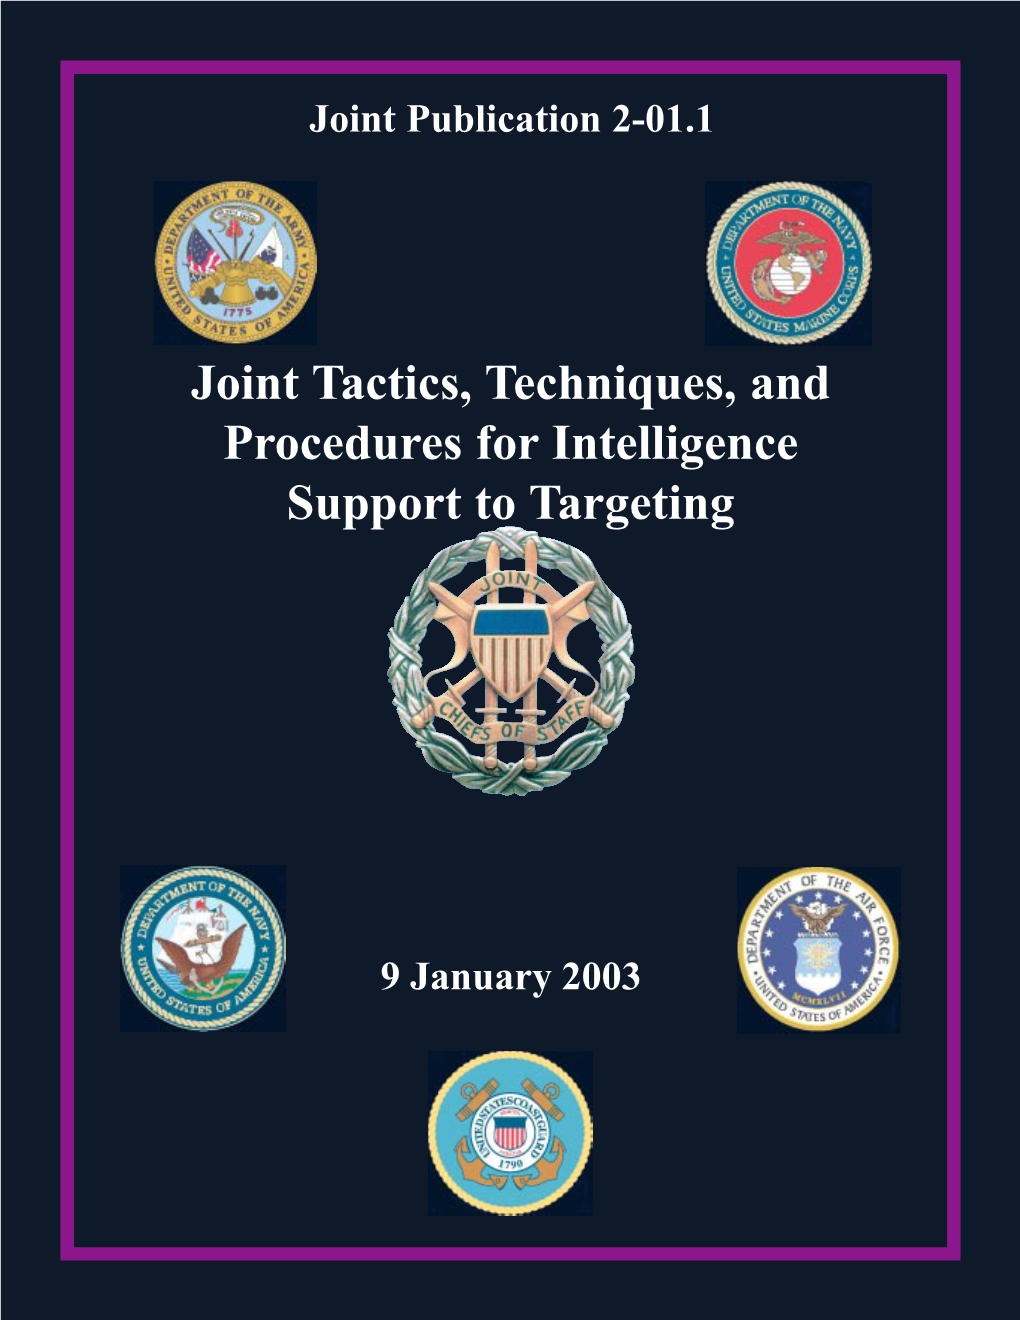 JP 2-01.1, Joint Tactics, Techniques, and Procedures for Intelligence